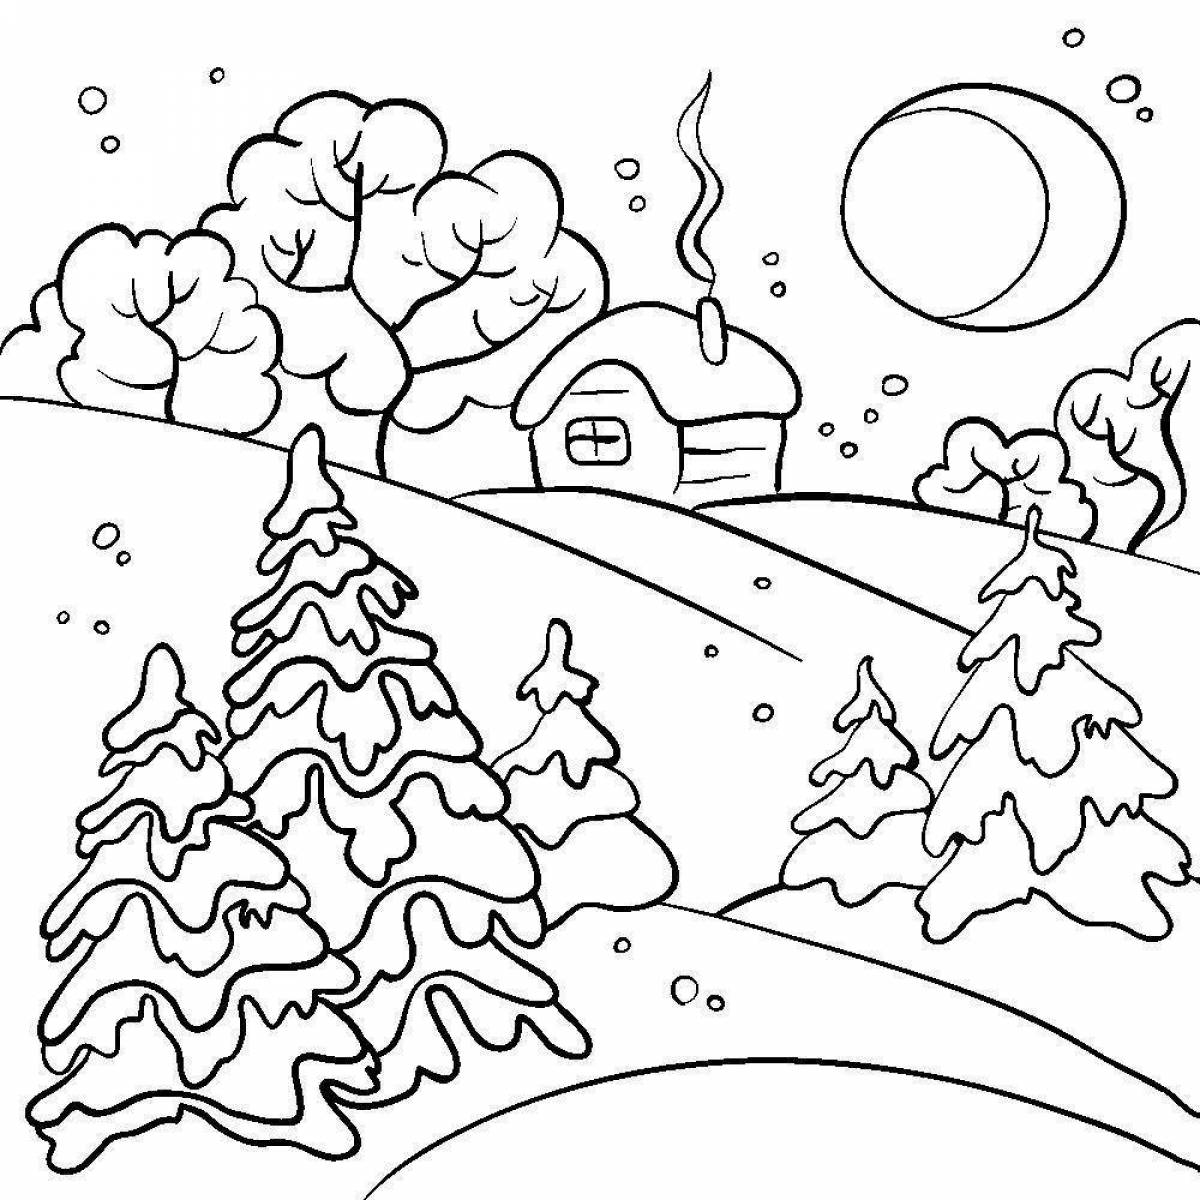 Exquisite winter fairy tale coloring book